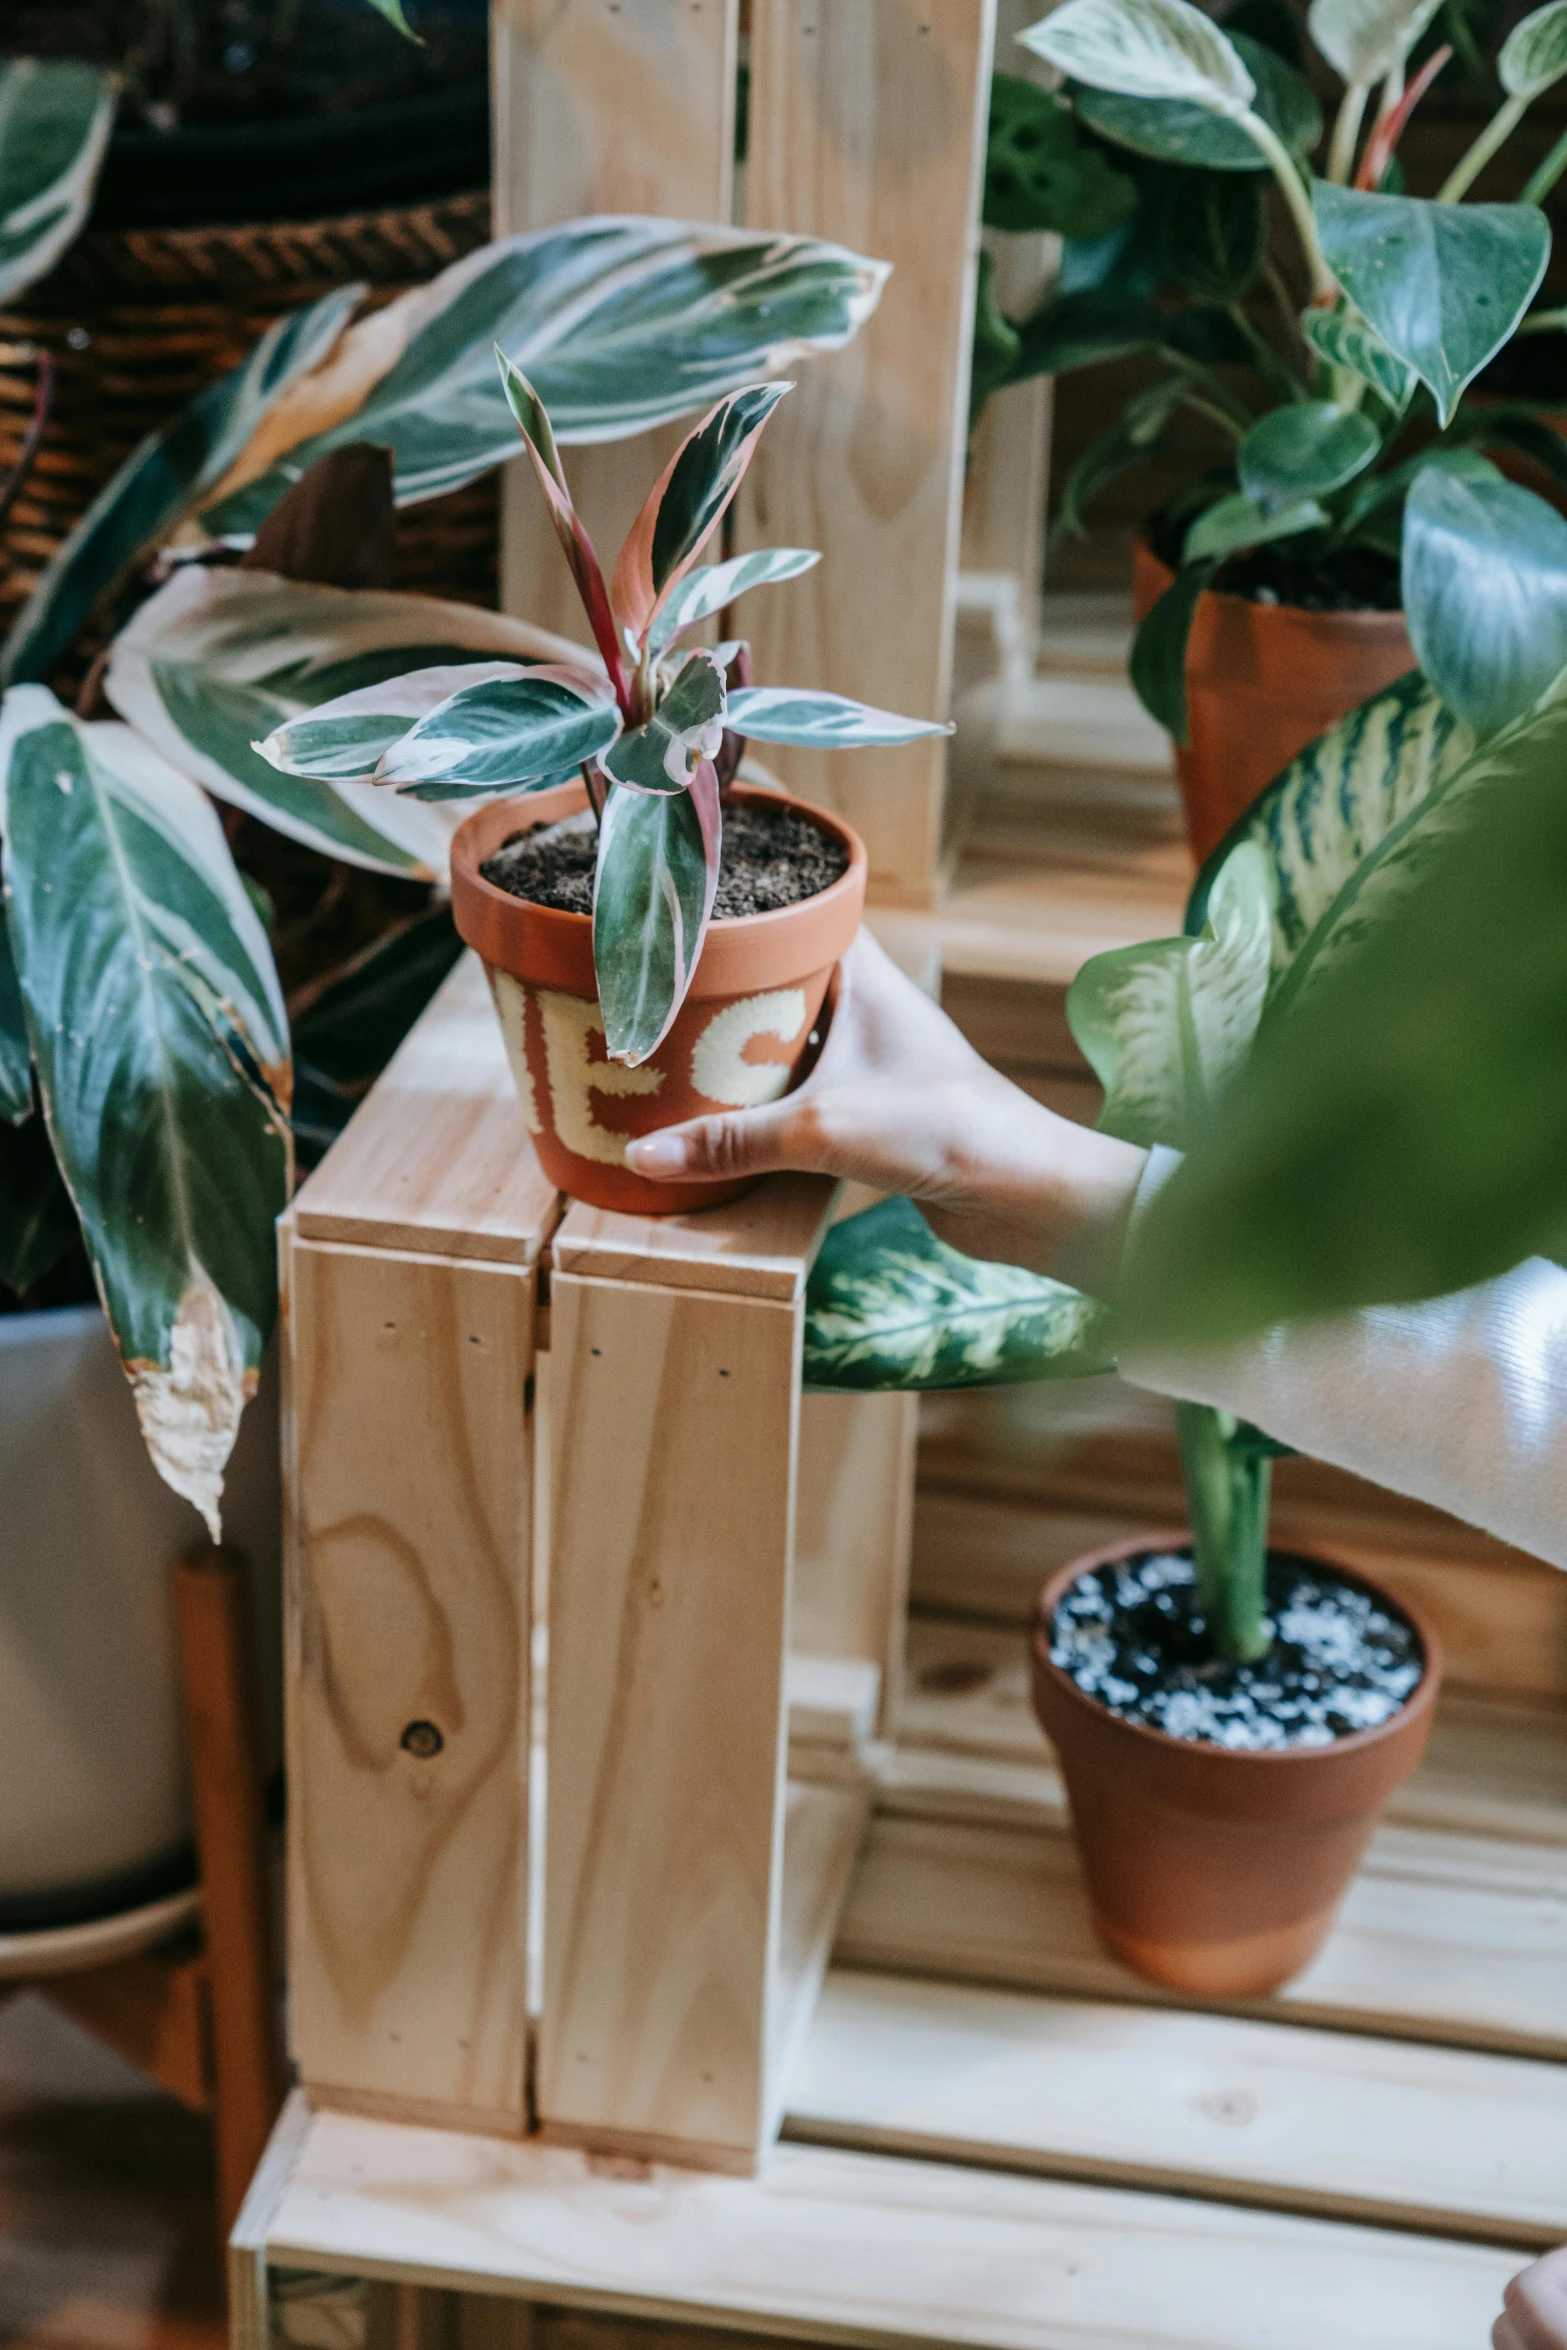 a person holding a potted plant on top of a wooden crate, by Emily Mason, indoor setting, no cropping, terracotta, growth